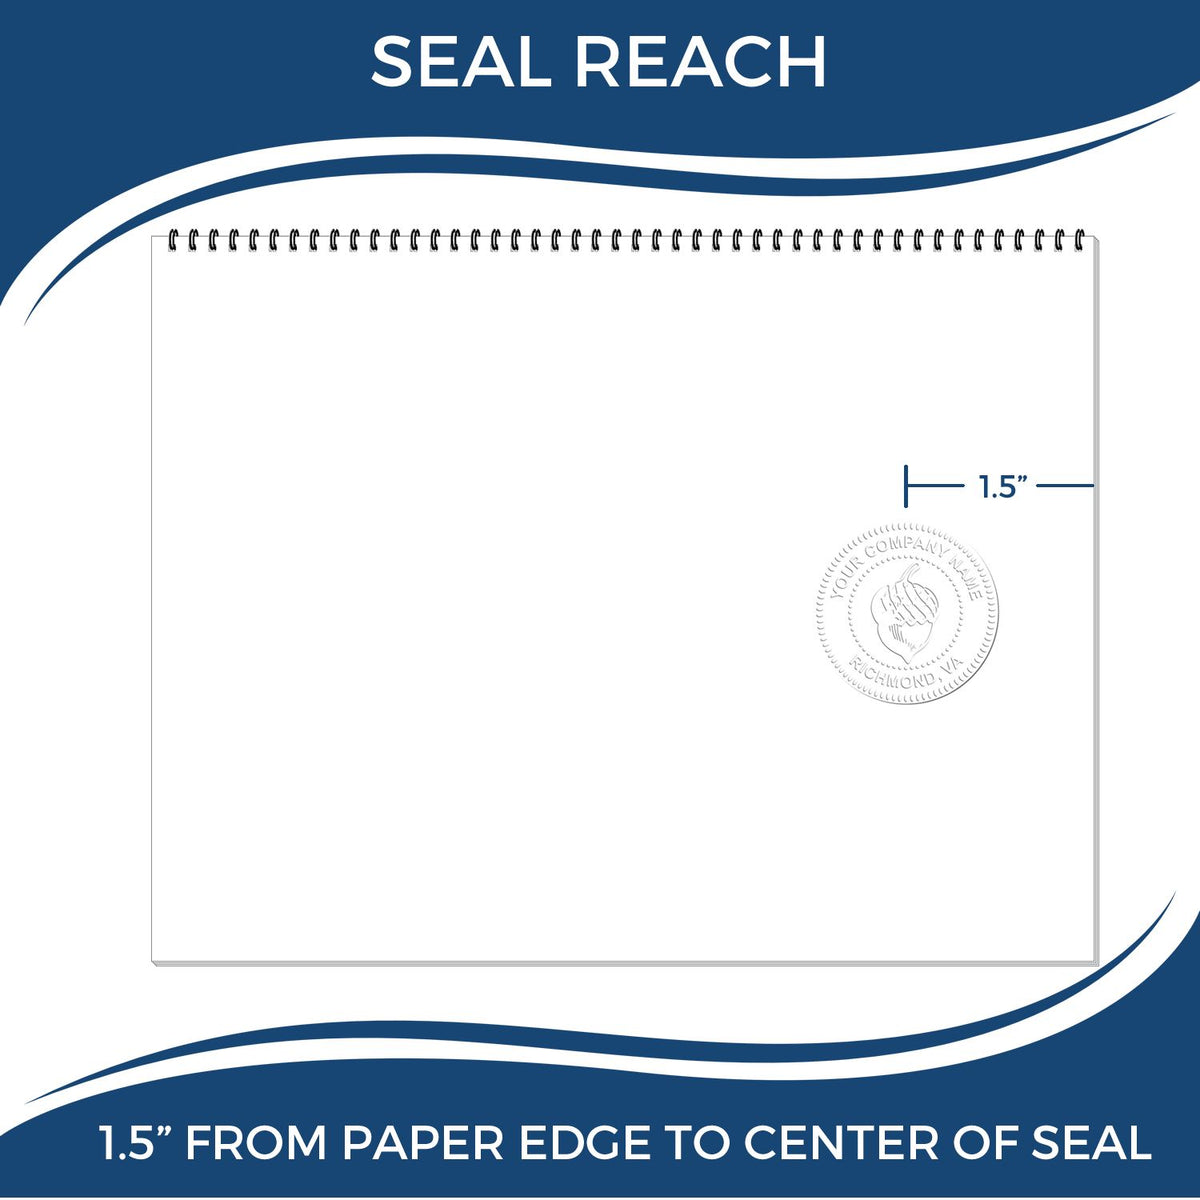 An infographic showing the seal reach which is represented by a ruler and a miniature seal image of the New Jersey Engineer Desk Seal